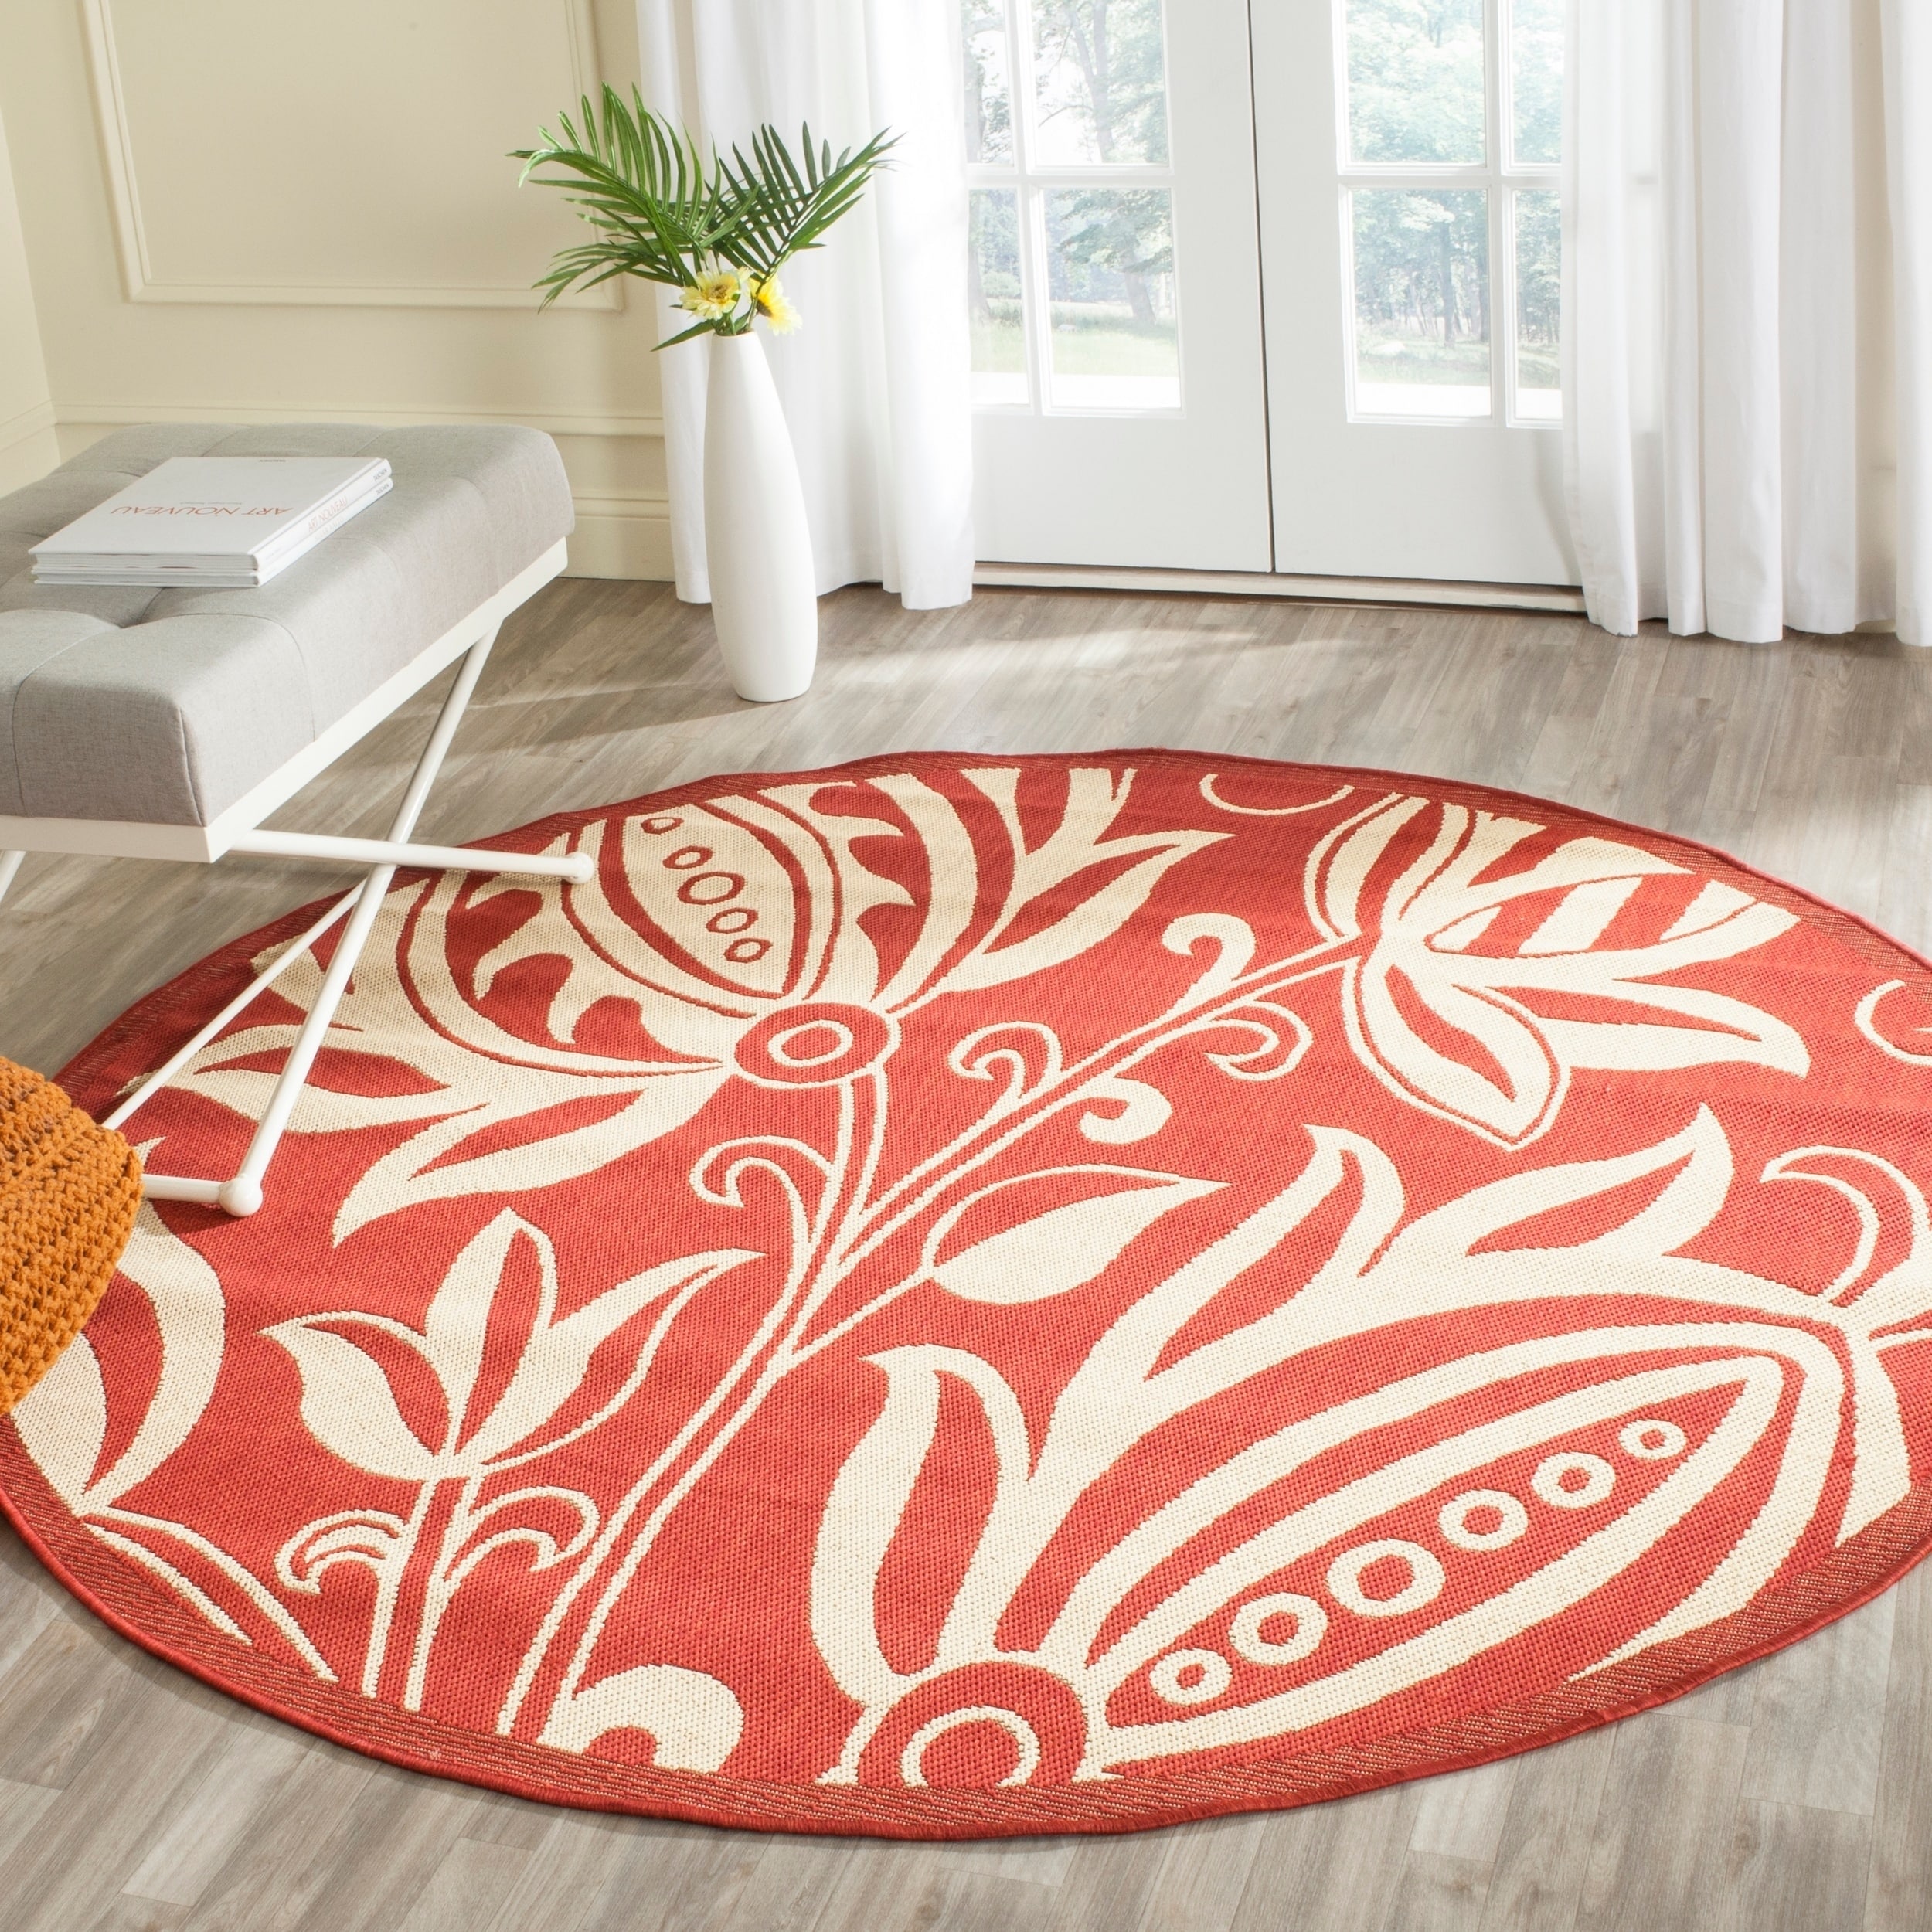 Shop Safavieh Andros Red/ Natural Indoor/ Outdoor Rug - 6'7